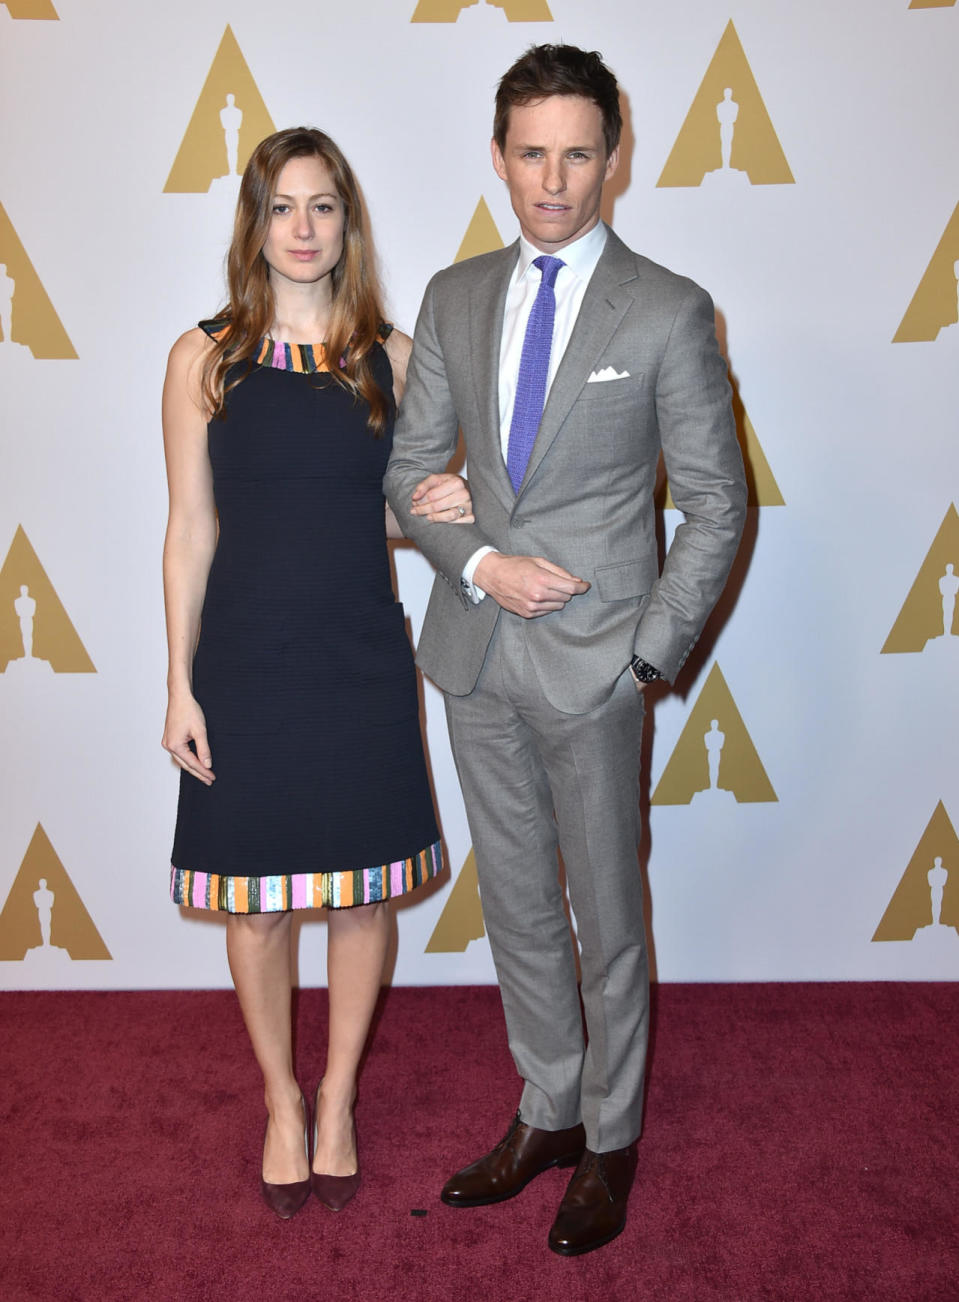 Eddie Redmayne in a gray suit with a purple tie with his pregnant wife, Hannah Bagshawe, at the 88th Annual Academy Awards nominee luncheon on February 8, 2016 in Beverly Hills, California.